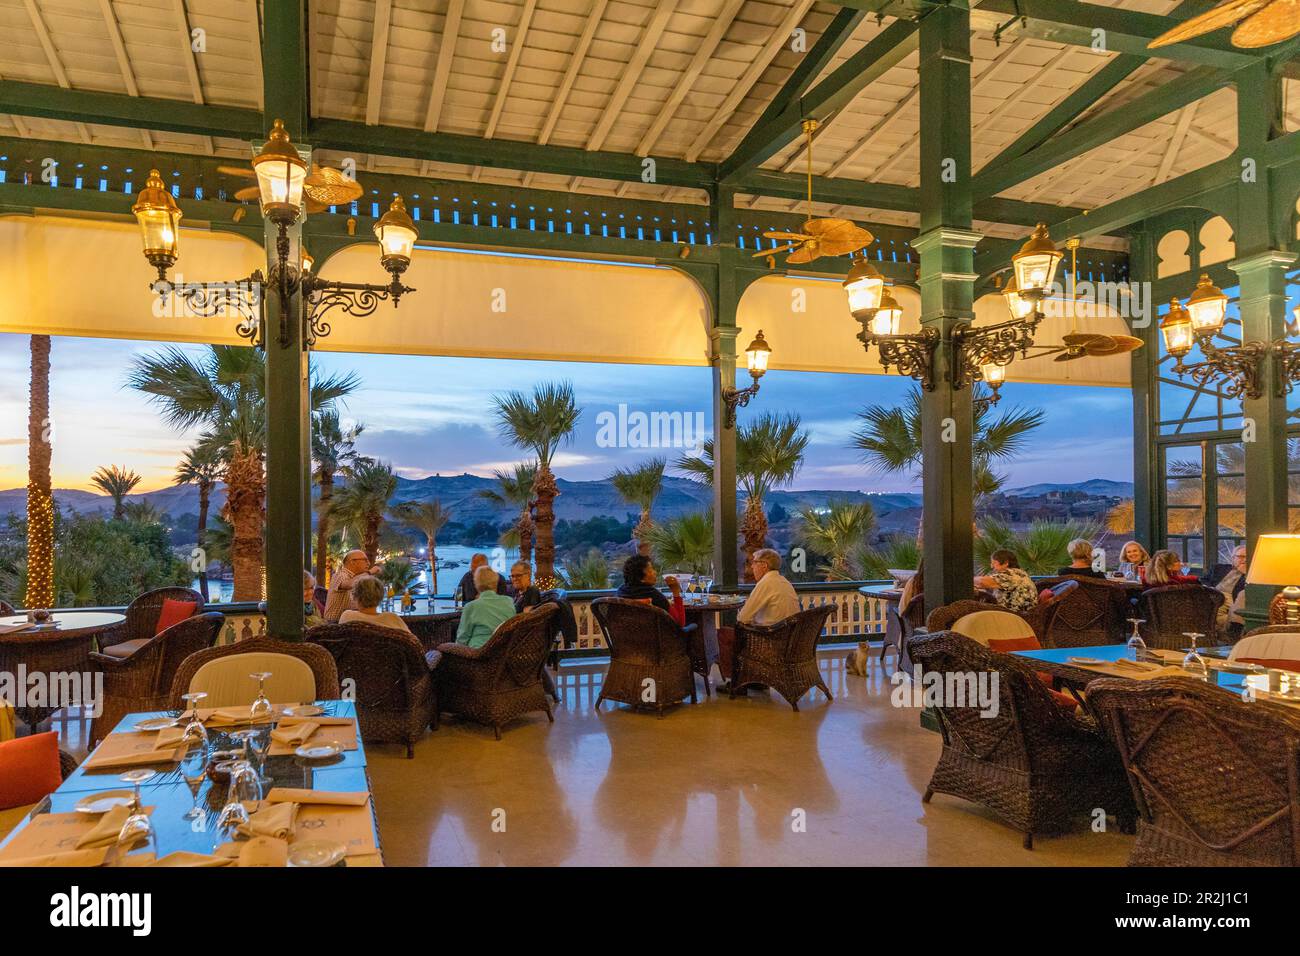 The Terrace Restaurant at The Old Cataract Hotel at dusk, Aswan, Egypt, North Africa, Africa Stock Photo